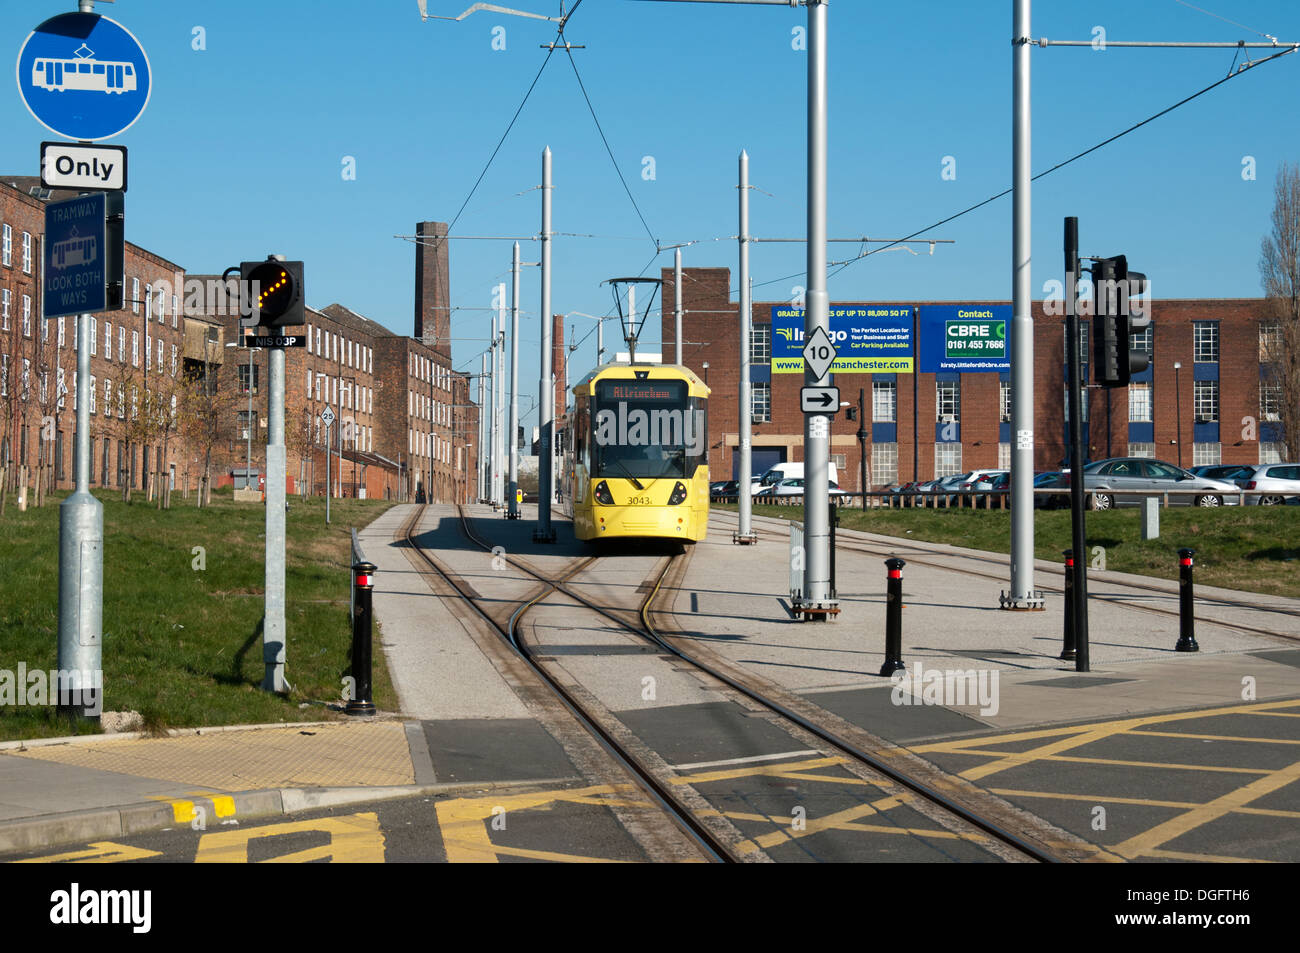 A Metrolink tram on the turnback sidings near Piccadilly Station, Manchester, England, UK Stock Photo